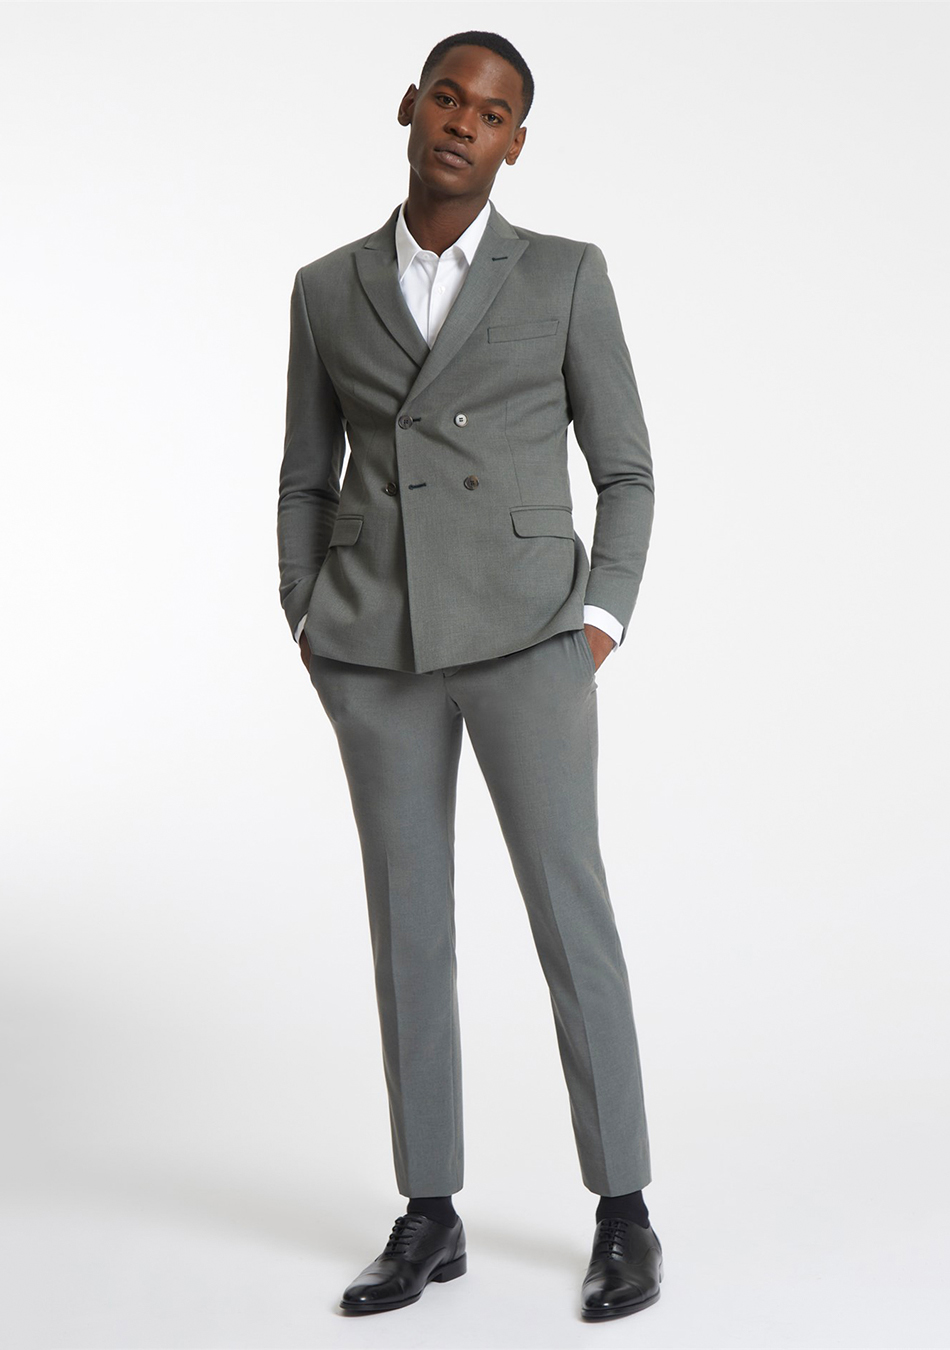 Grey double-breasted suit, white dress shirt, and black brogue shoes